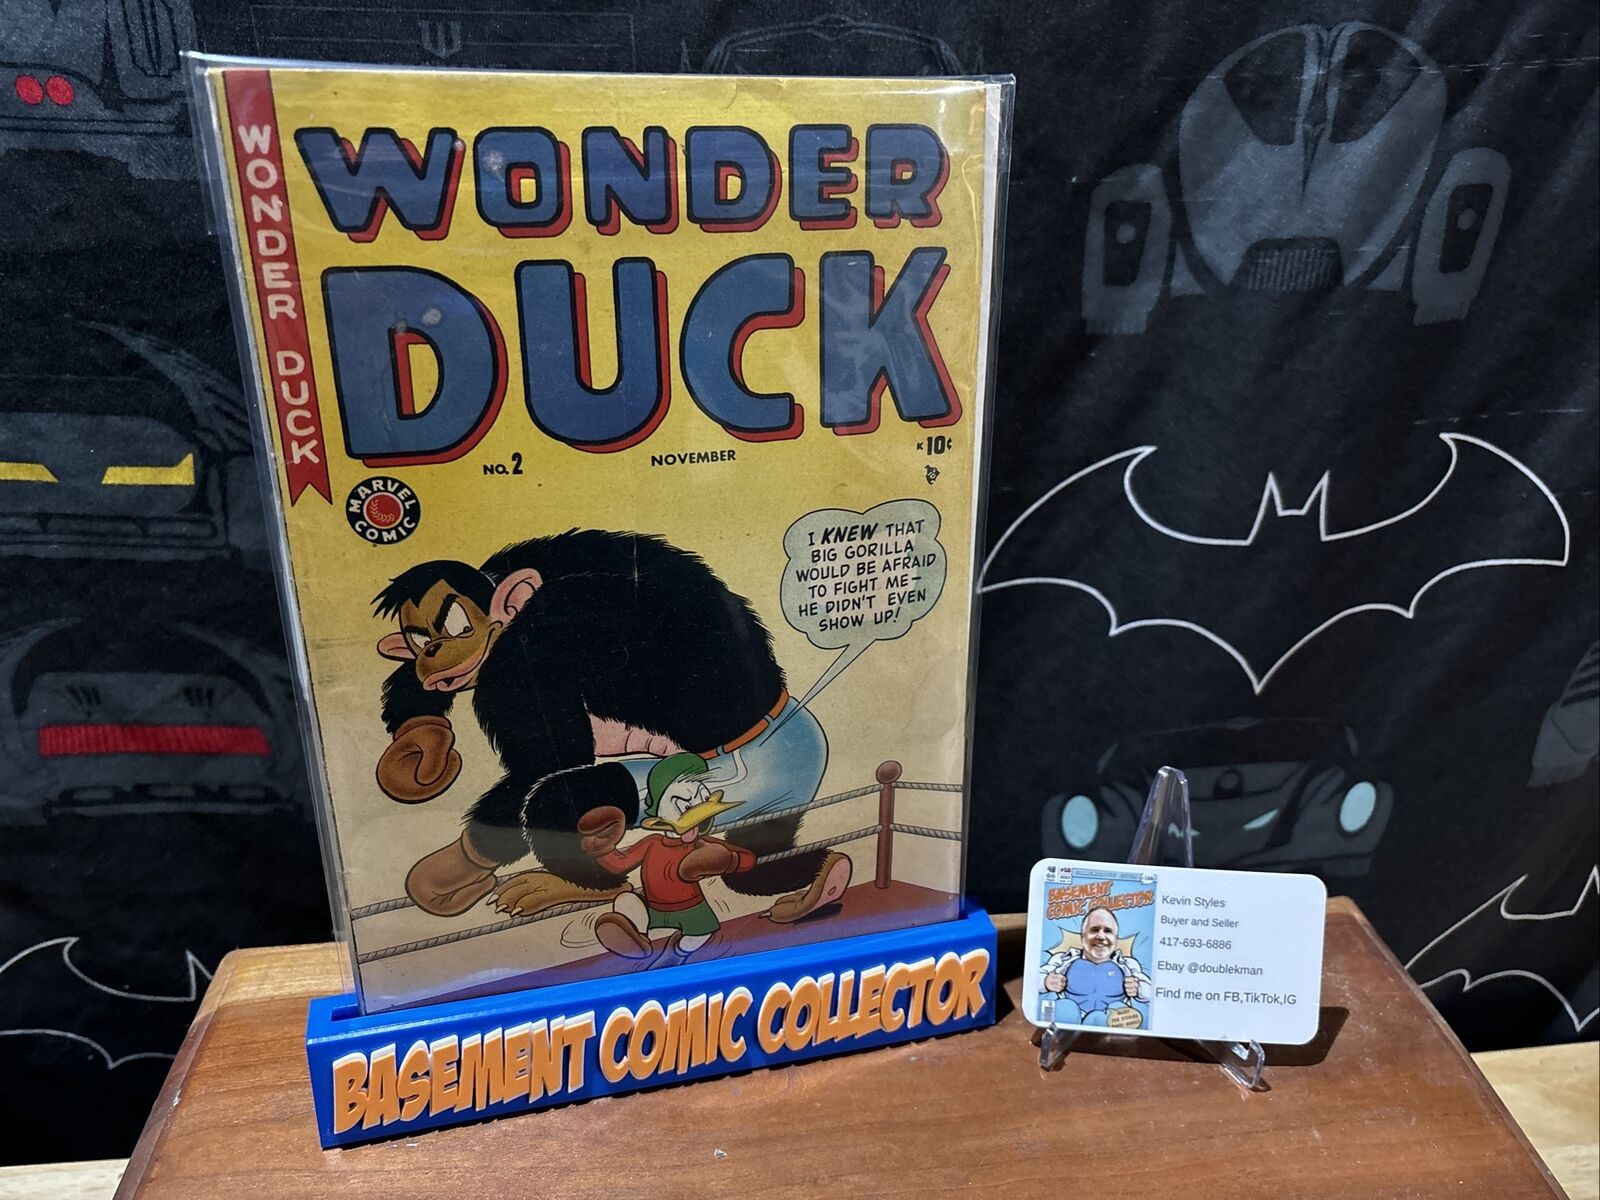 Wonder Duck #2 1949-Marvel-Stan Lee. Excellent Condition. Gemini Shipped